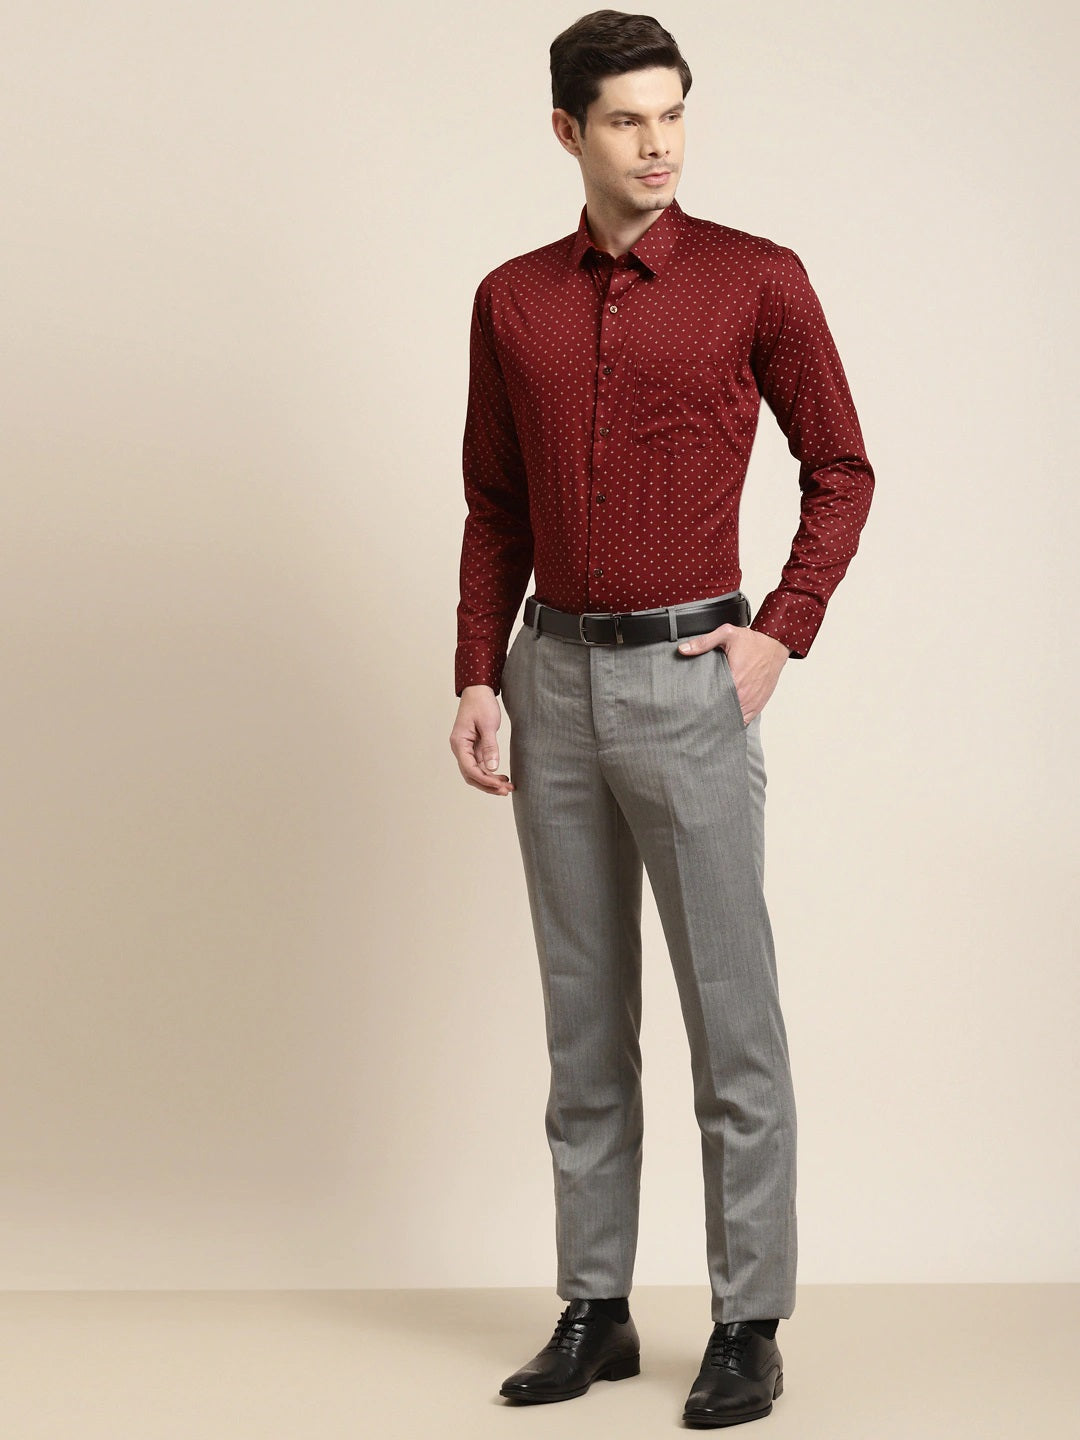 Man in blue dress shirt and brown pants wearing white and red knit cap  photo – Free Tanzania Image on Unsplash